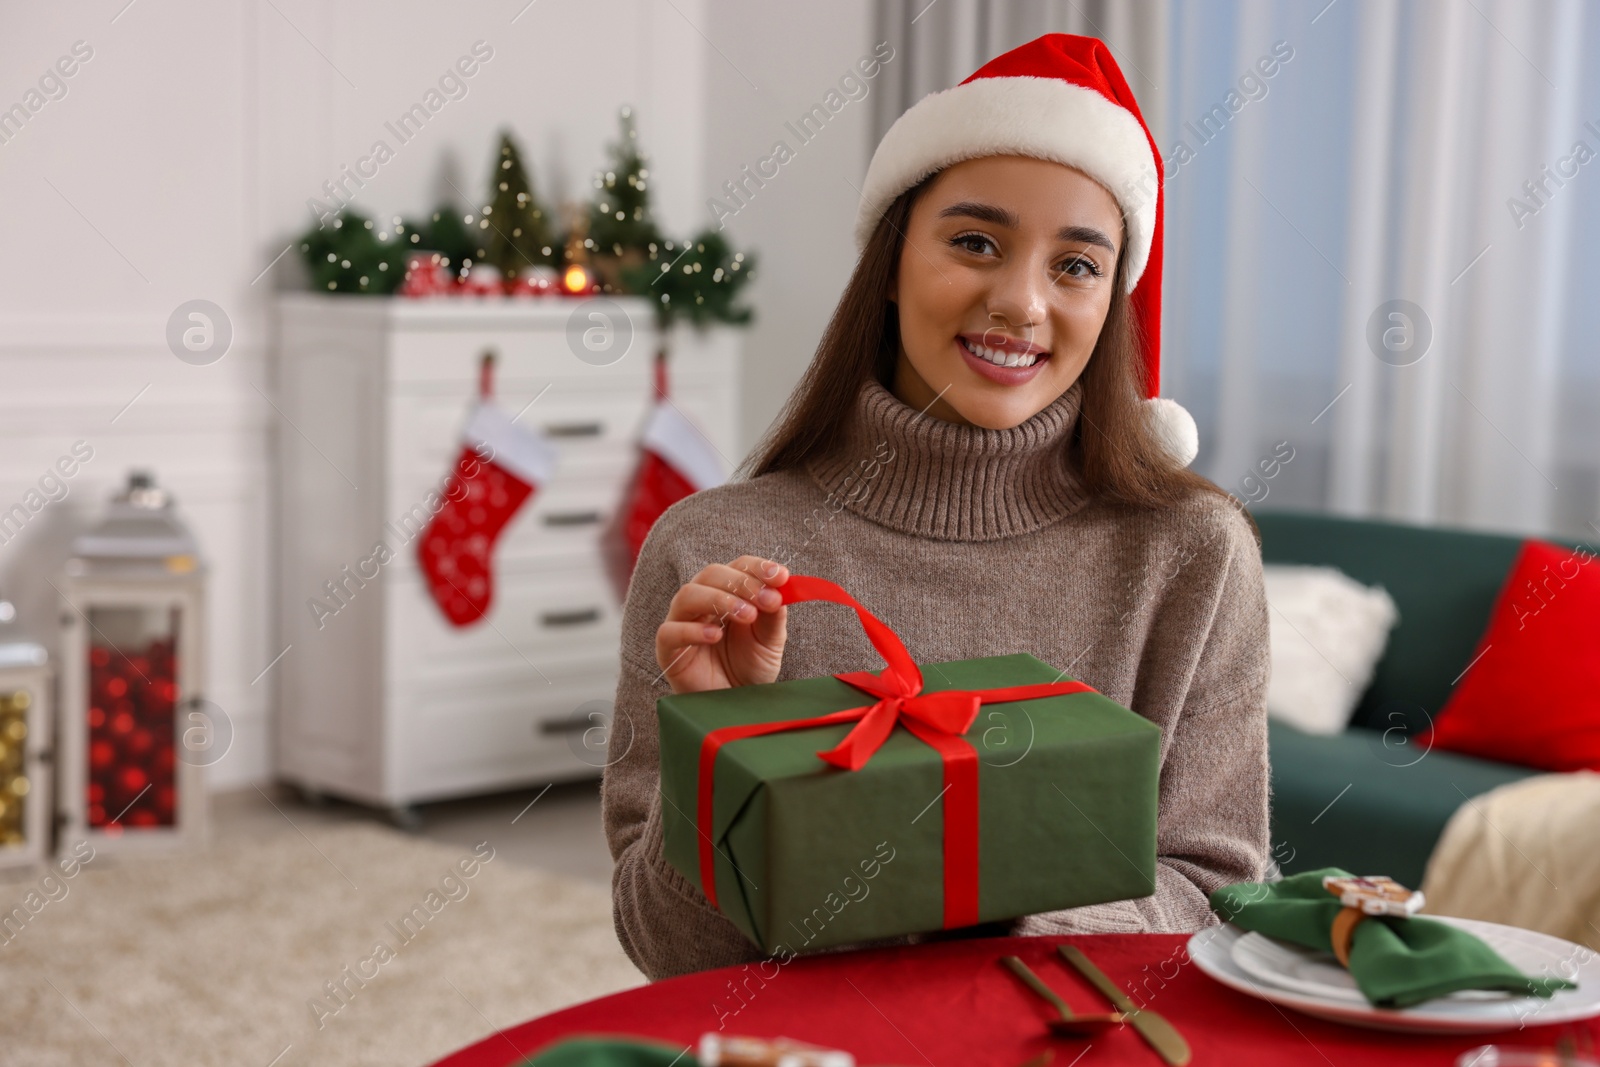 Photo of Happy young woman in Santa hat opening Christmas gift at served table in decorated room